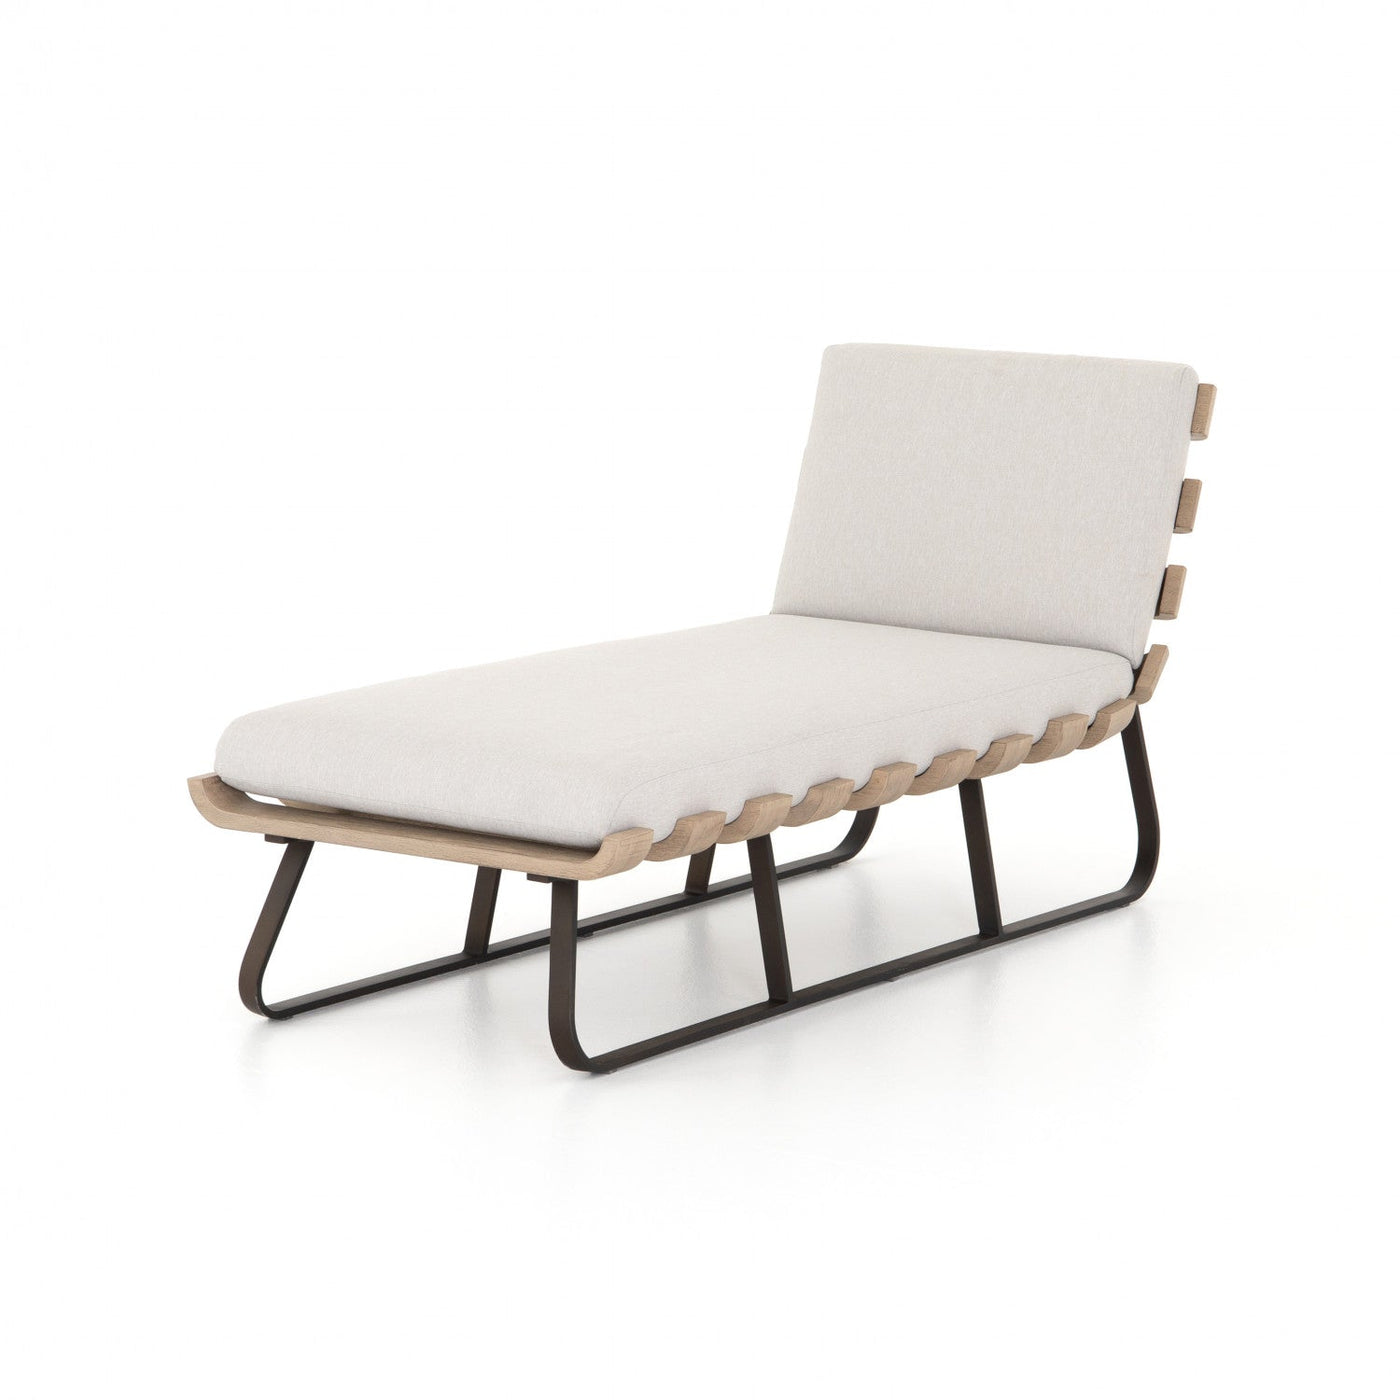 DIMITRI OUTDOOR SINGLE DAYBED